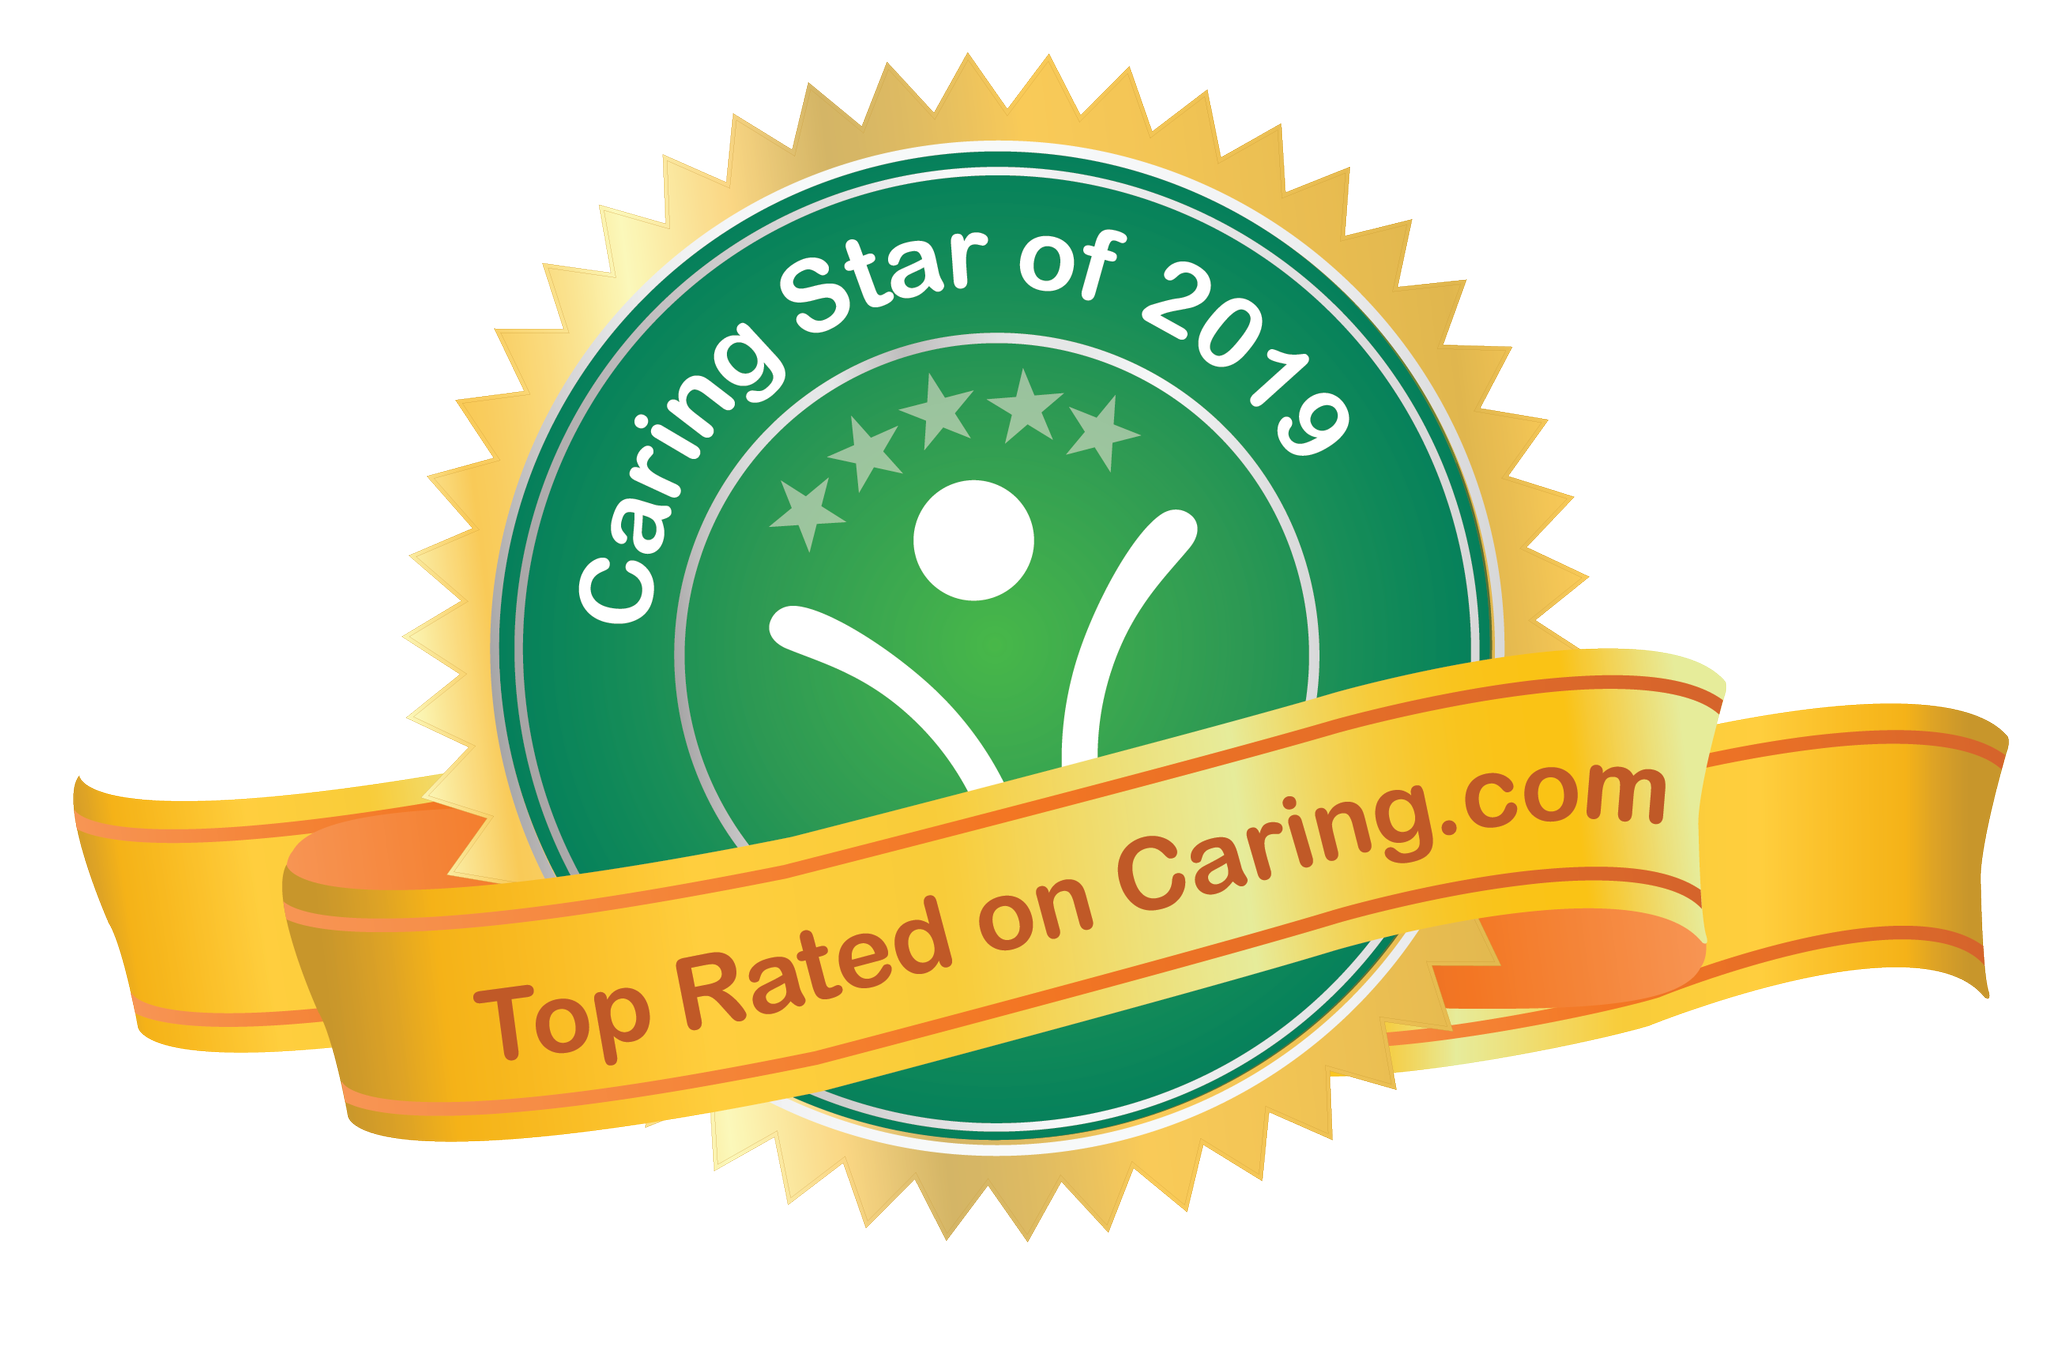 Caring Star of 2019, Top Rated on Caring.com